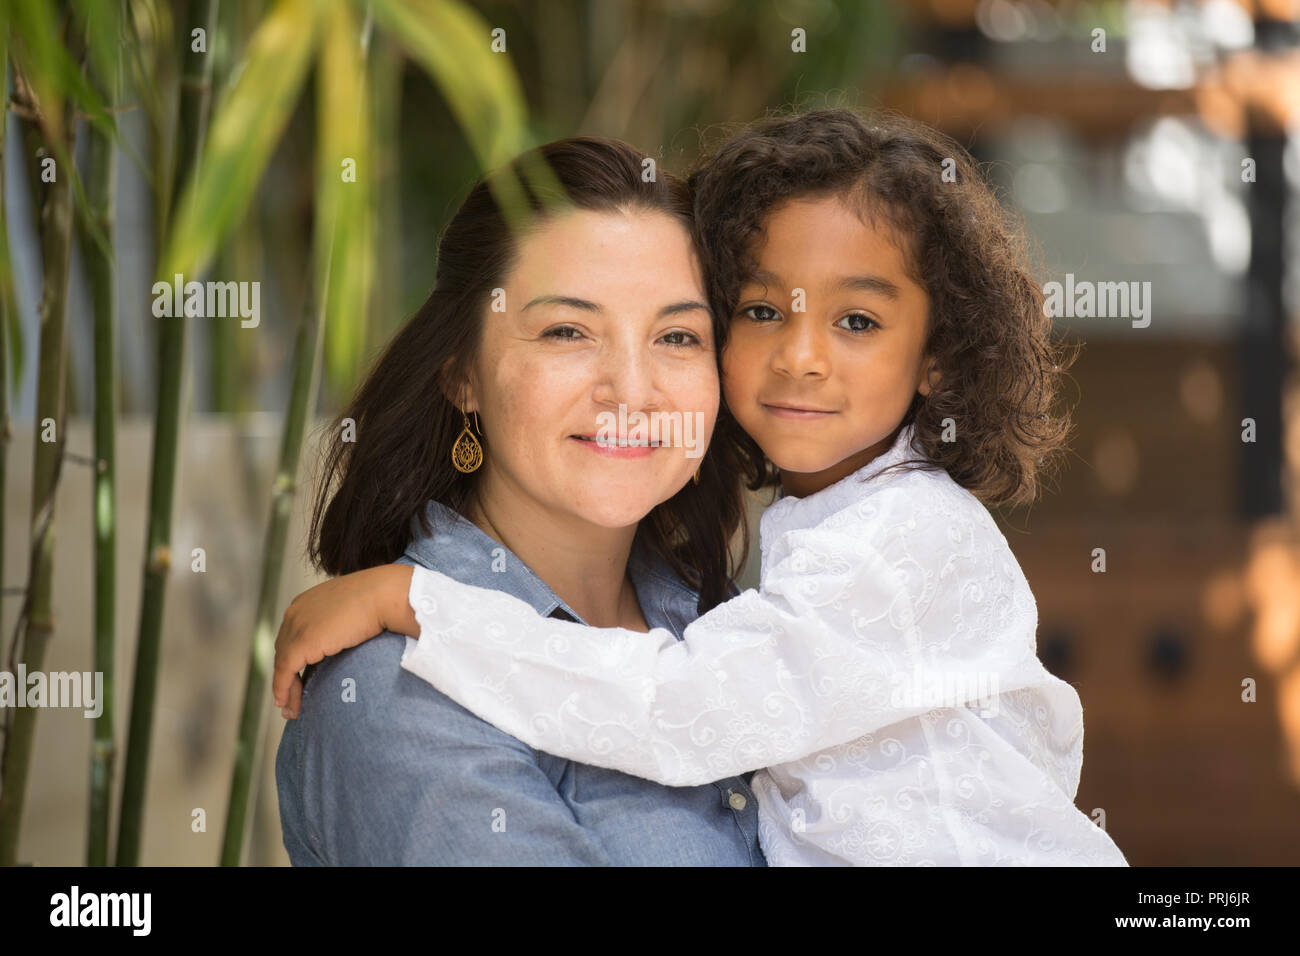 Portrait of a Hispanic mother and her daughter laughing. Stock Photo